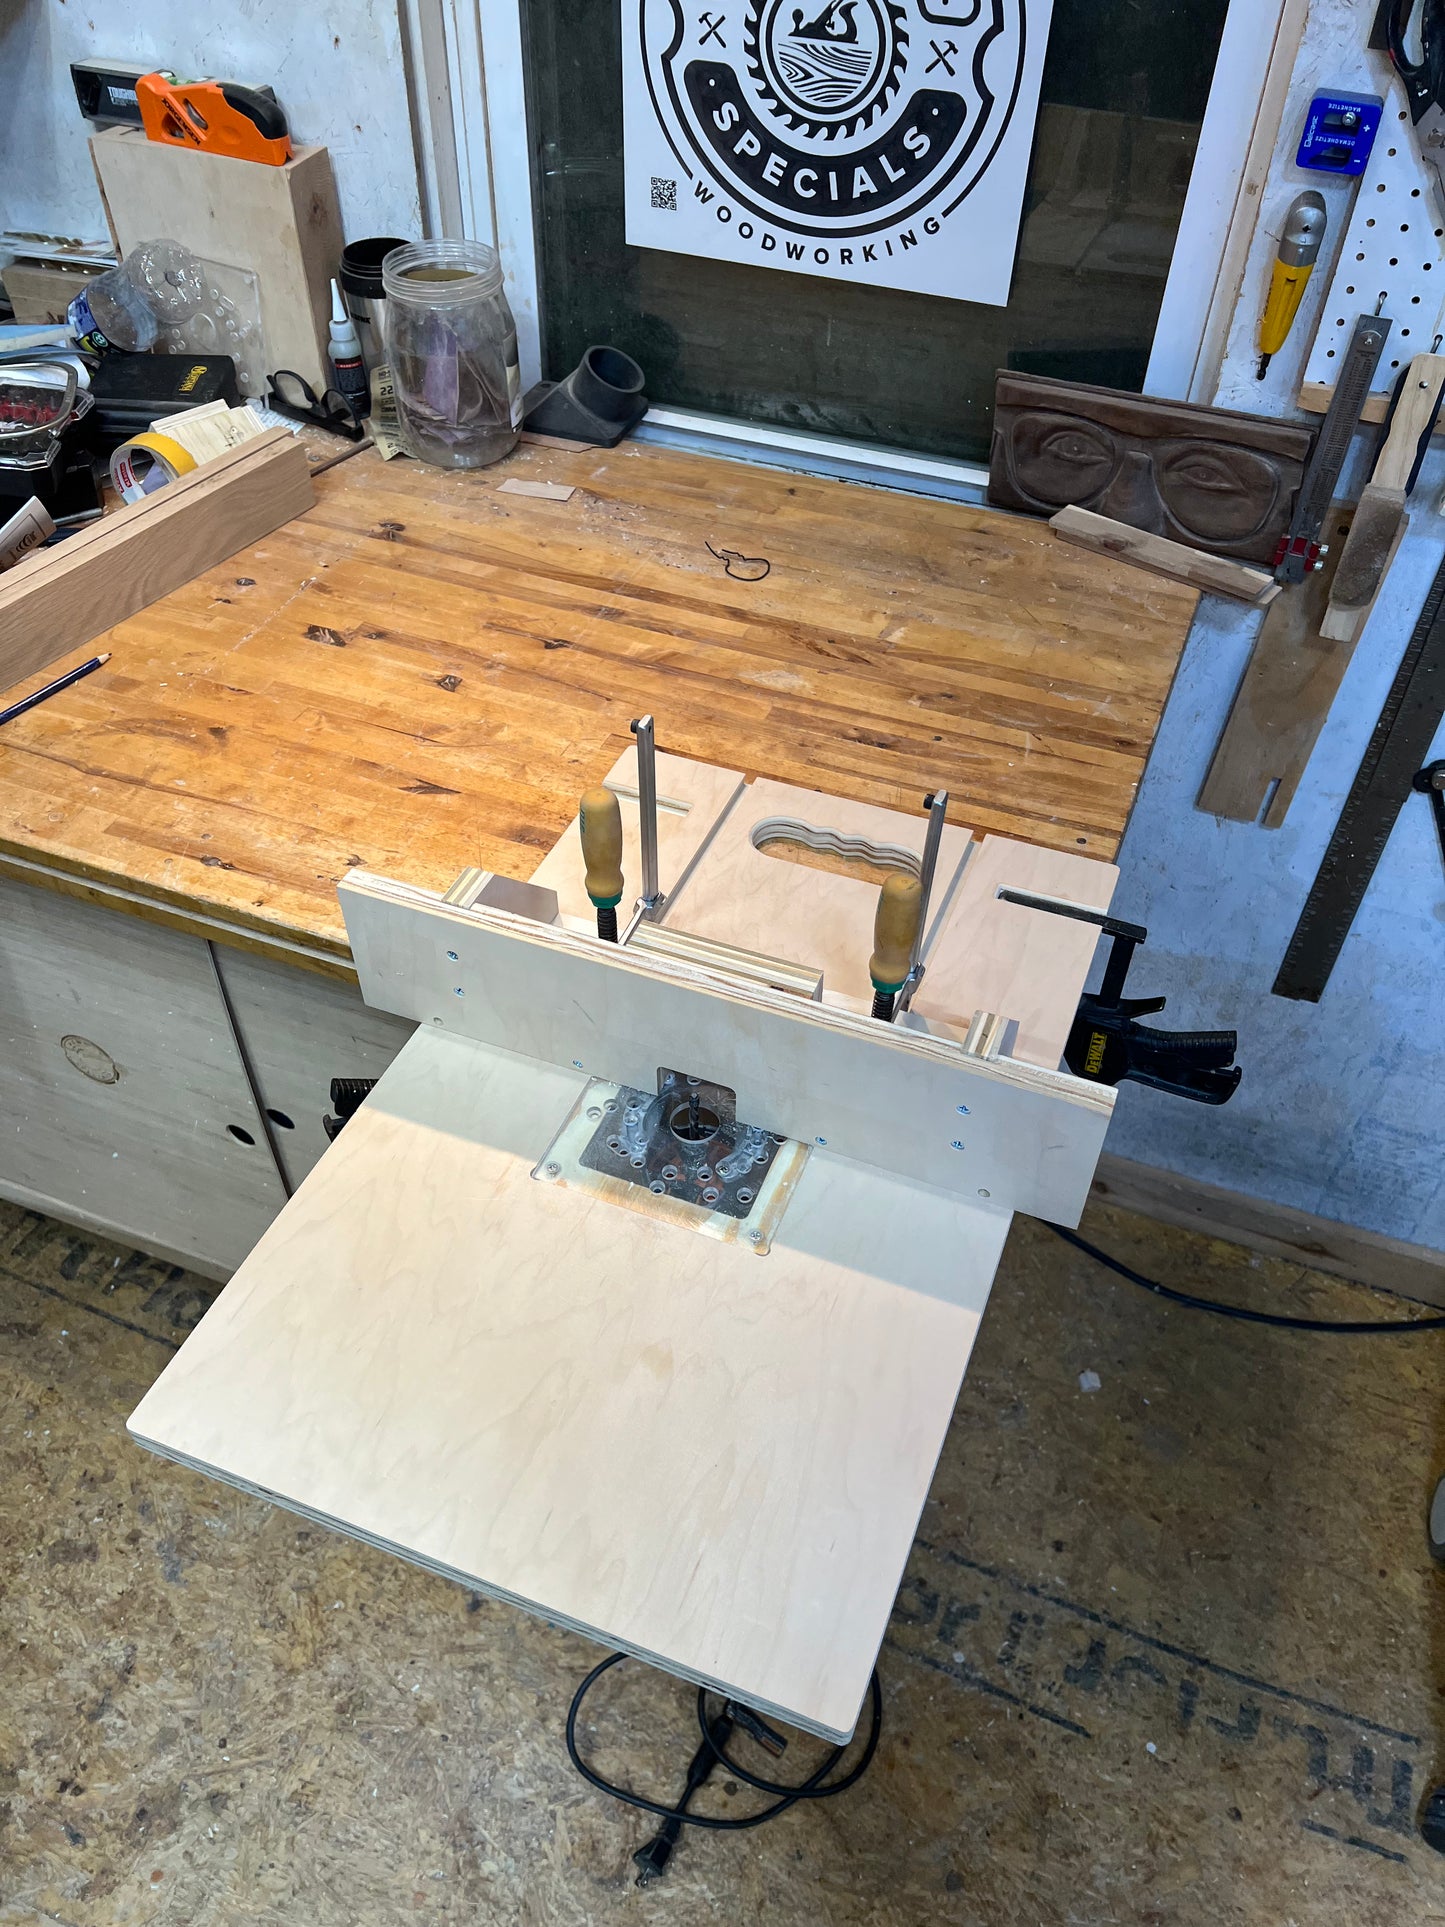 Portable router table with fence and universal baseplate